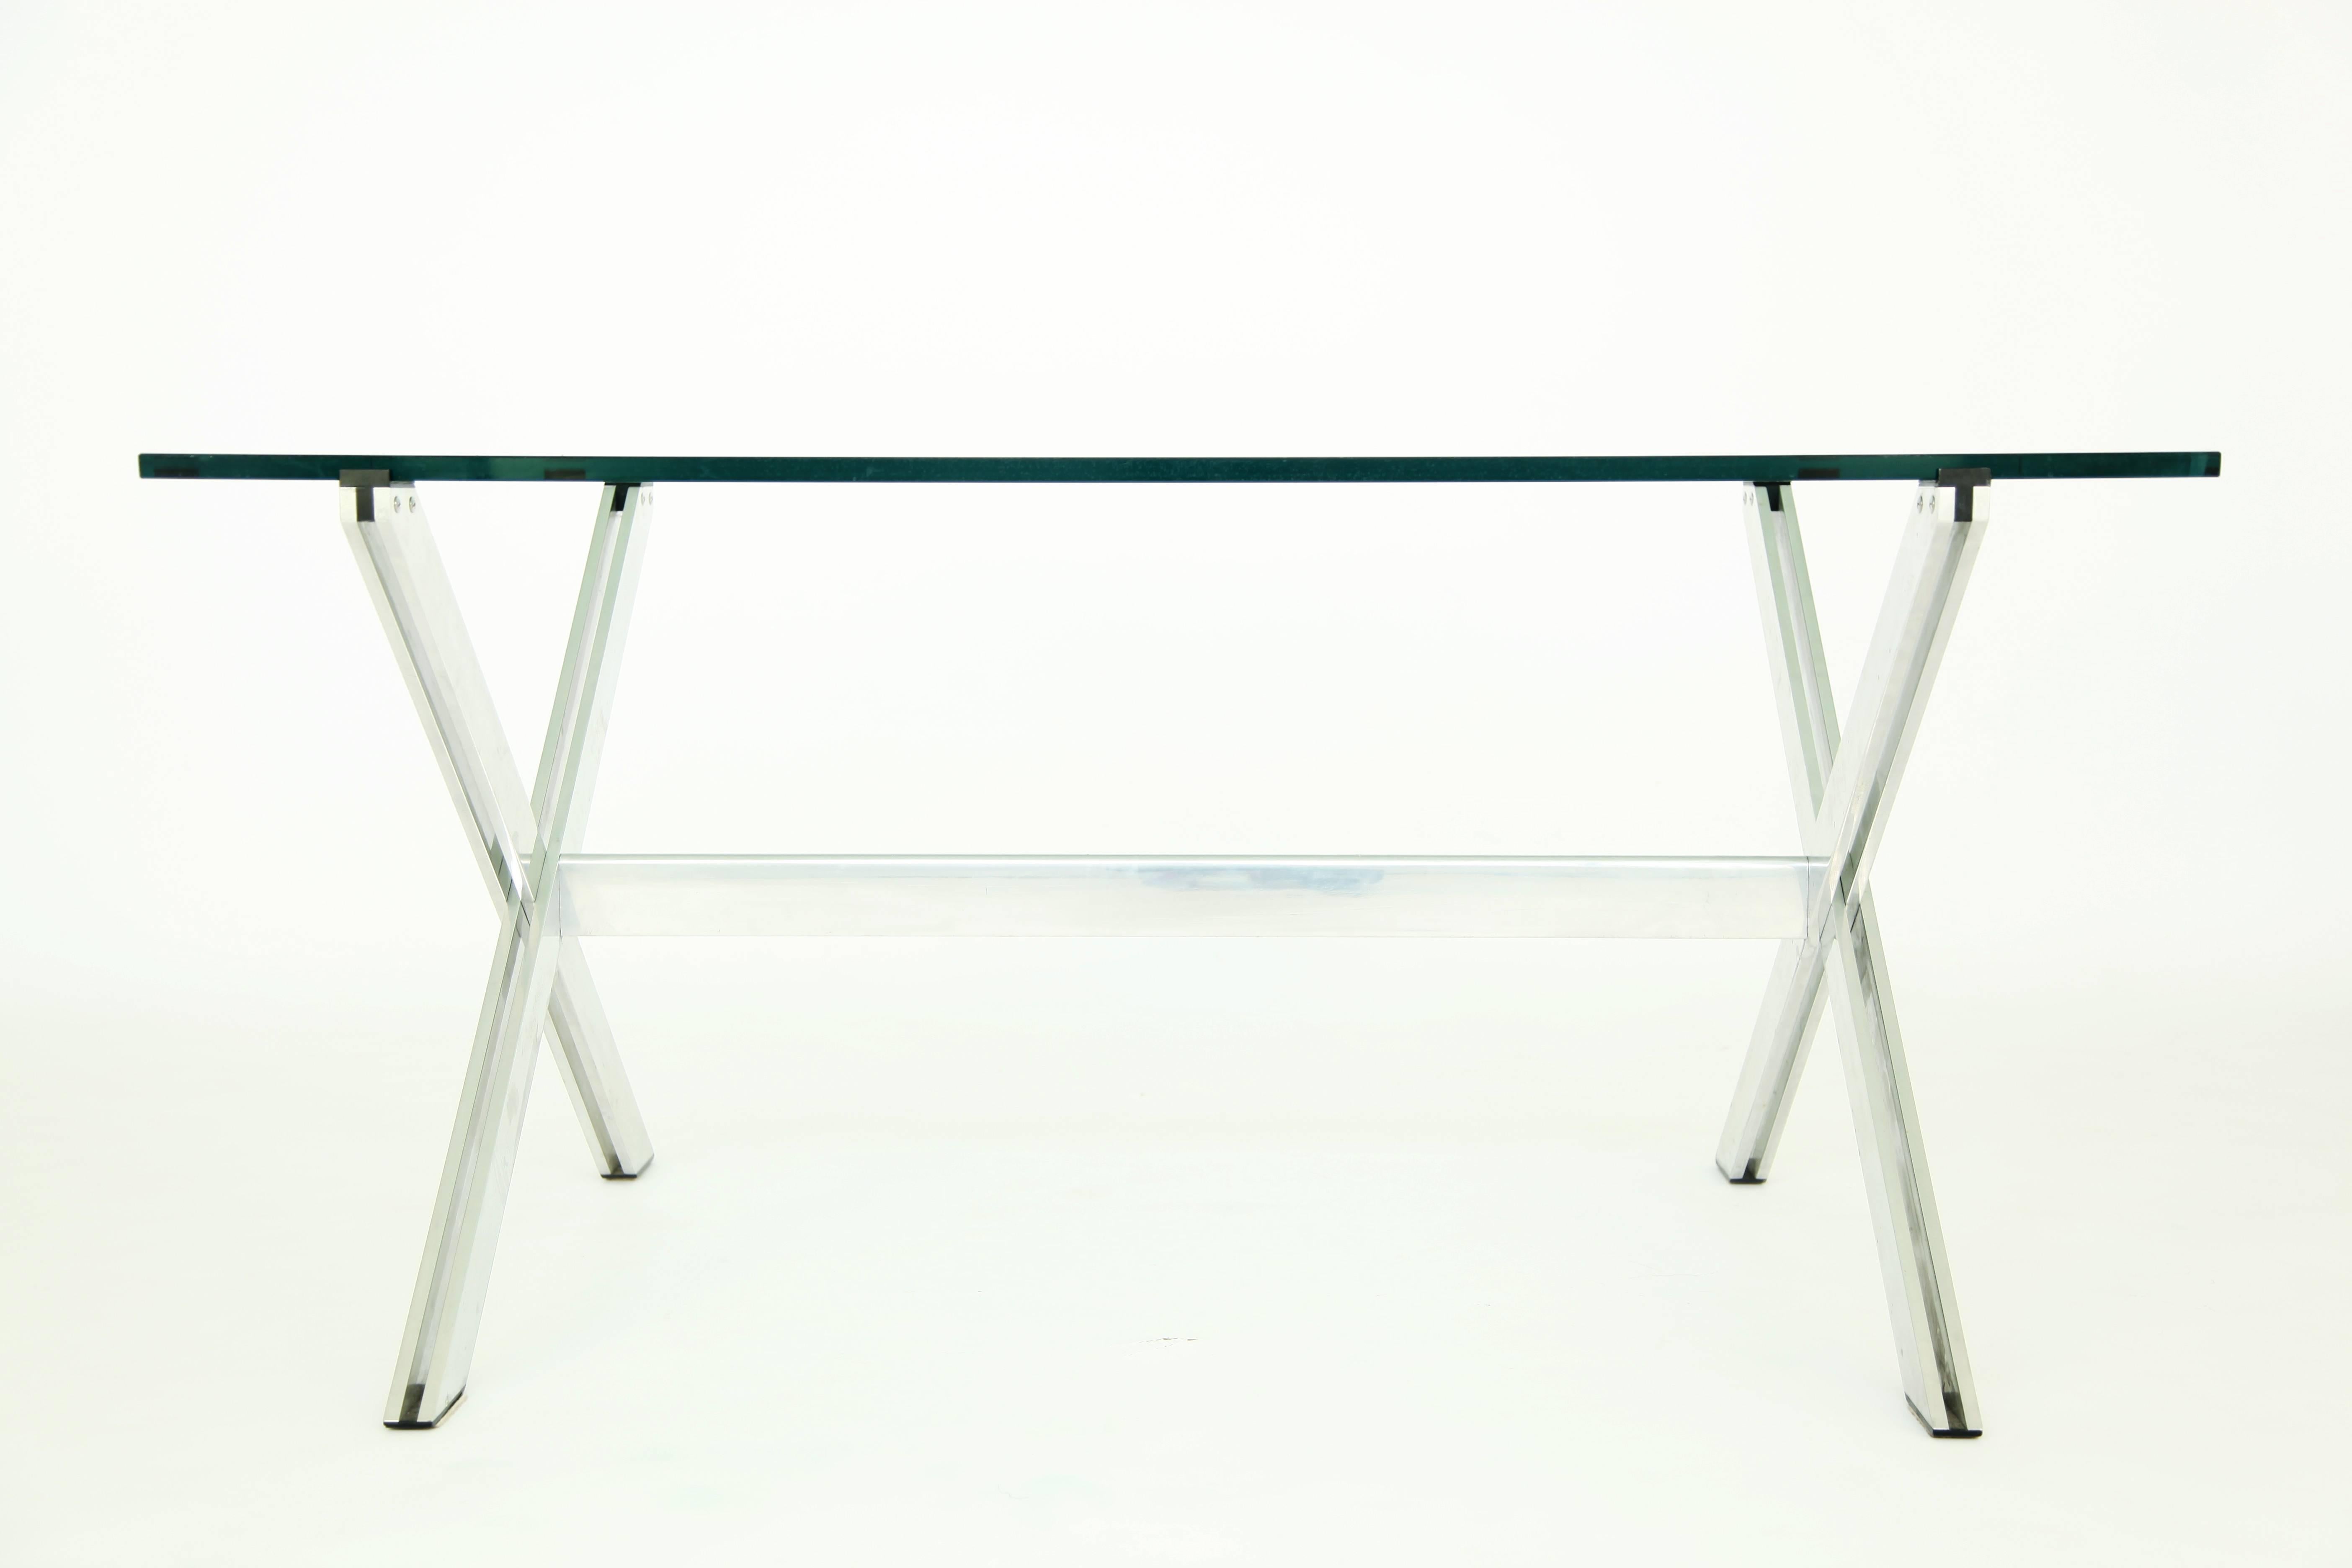 John Vesey for a commissioned interiors, parallel bar table 
Stainless steel with plastic feet and claws for surface.
We have two different sizes from the same interior, showing smaller version, the other 12